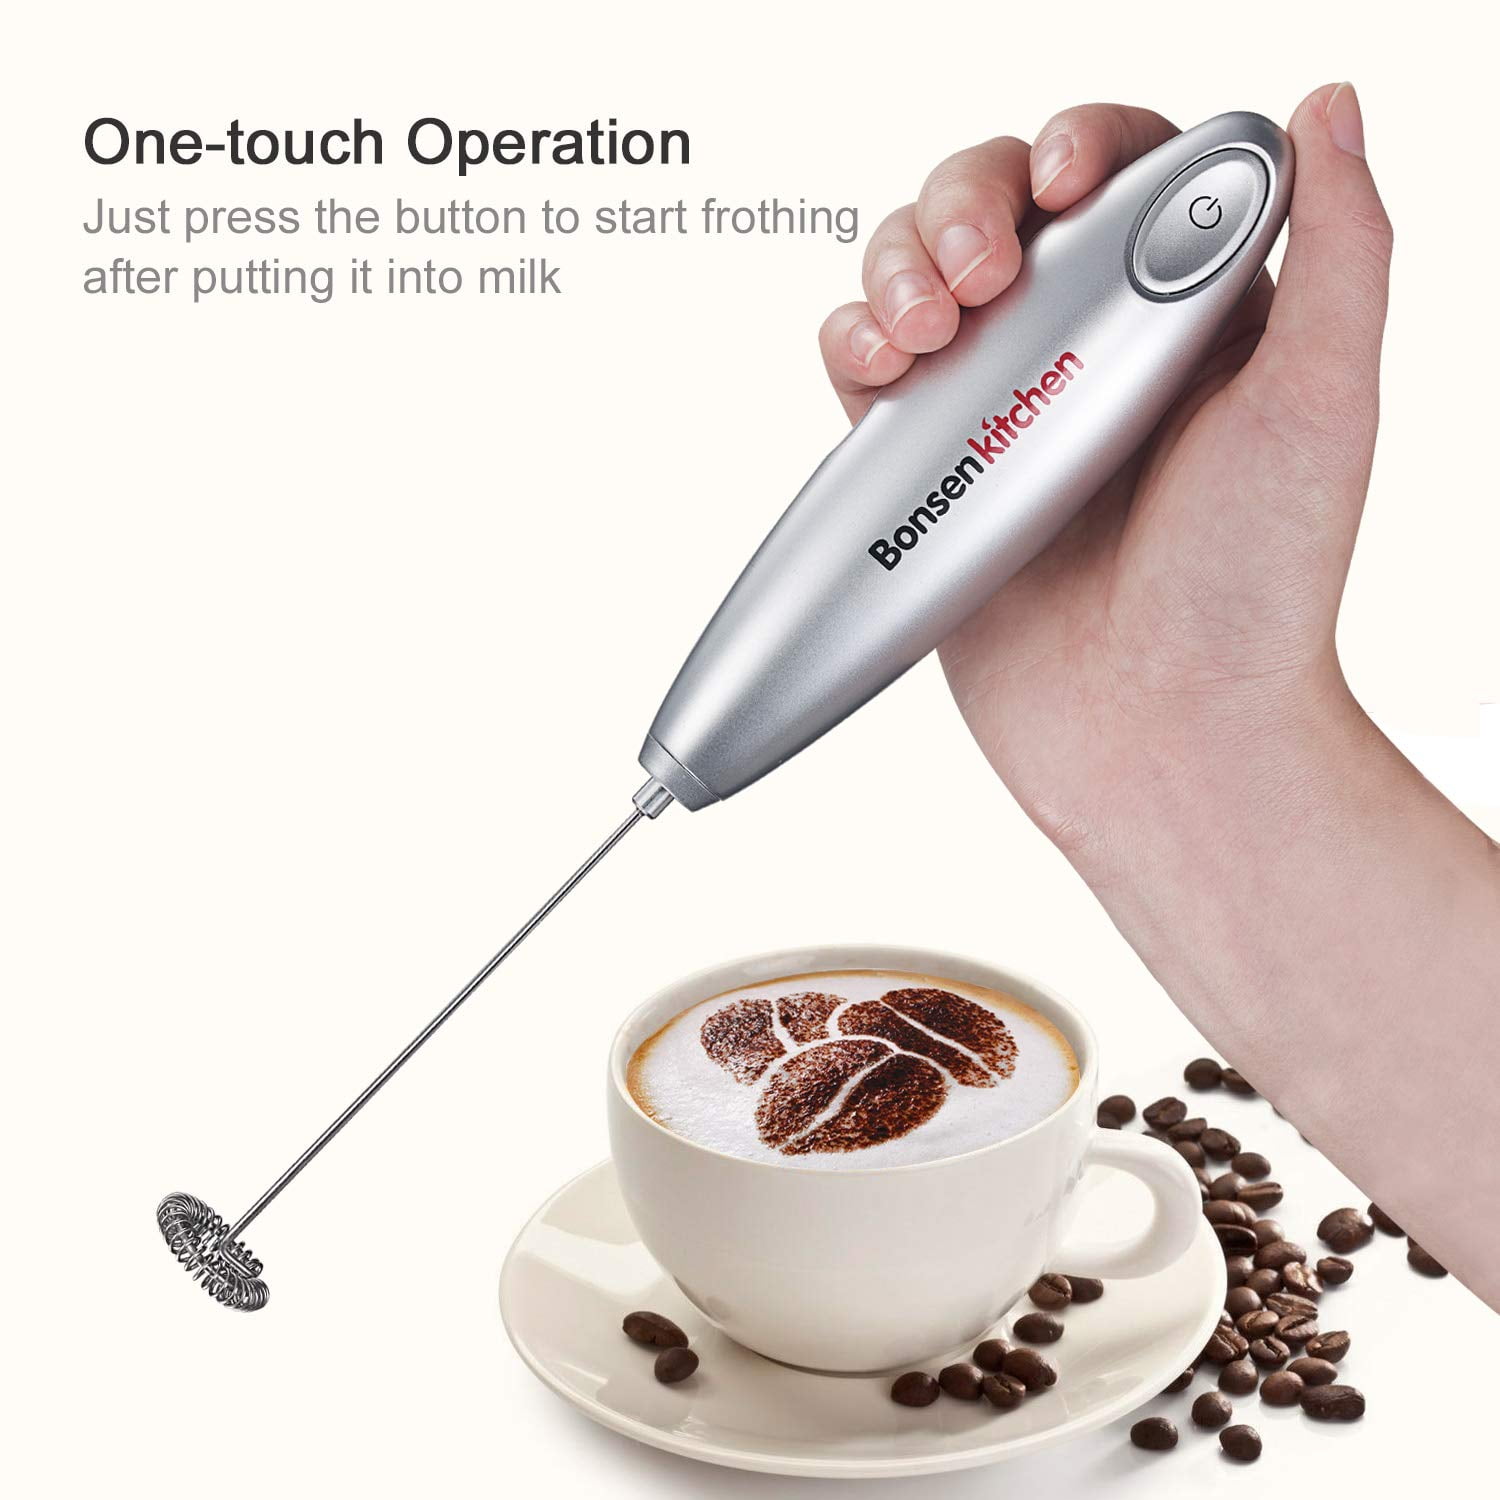  Bonsenkitchen Handheld Milk Frother, Electric Hand Foamer  Blender for Drink Mixer, Perfect for Bulletproof coffee, Matcha, Hot  Chocolate, Mini Battery Operated Milk Whisk Frother-Seafoam: Home & Kitchen